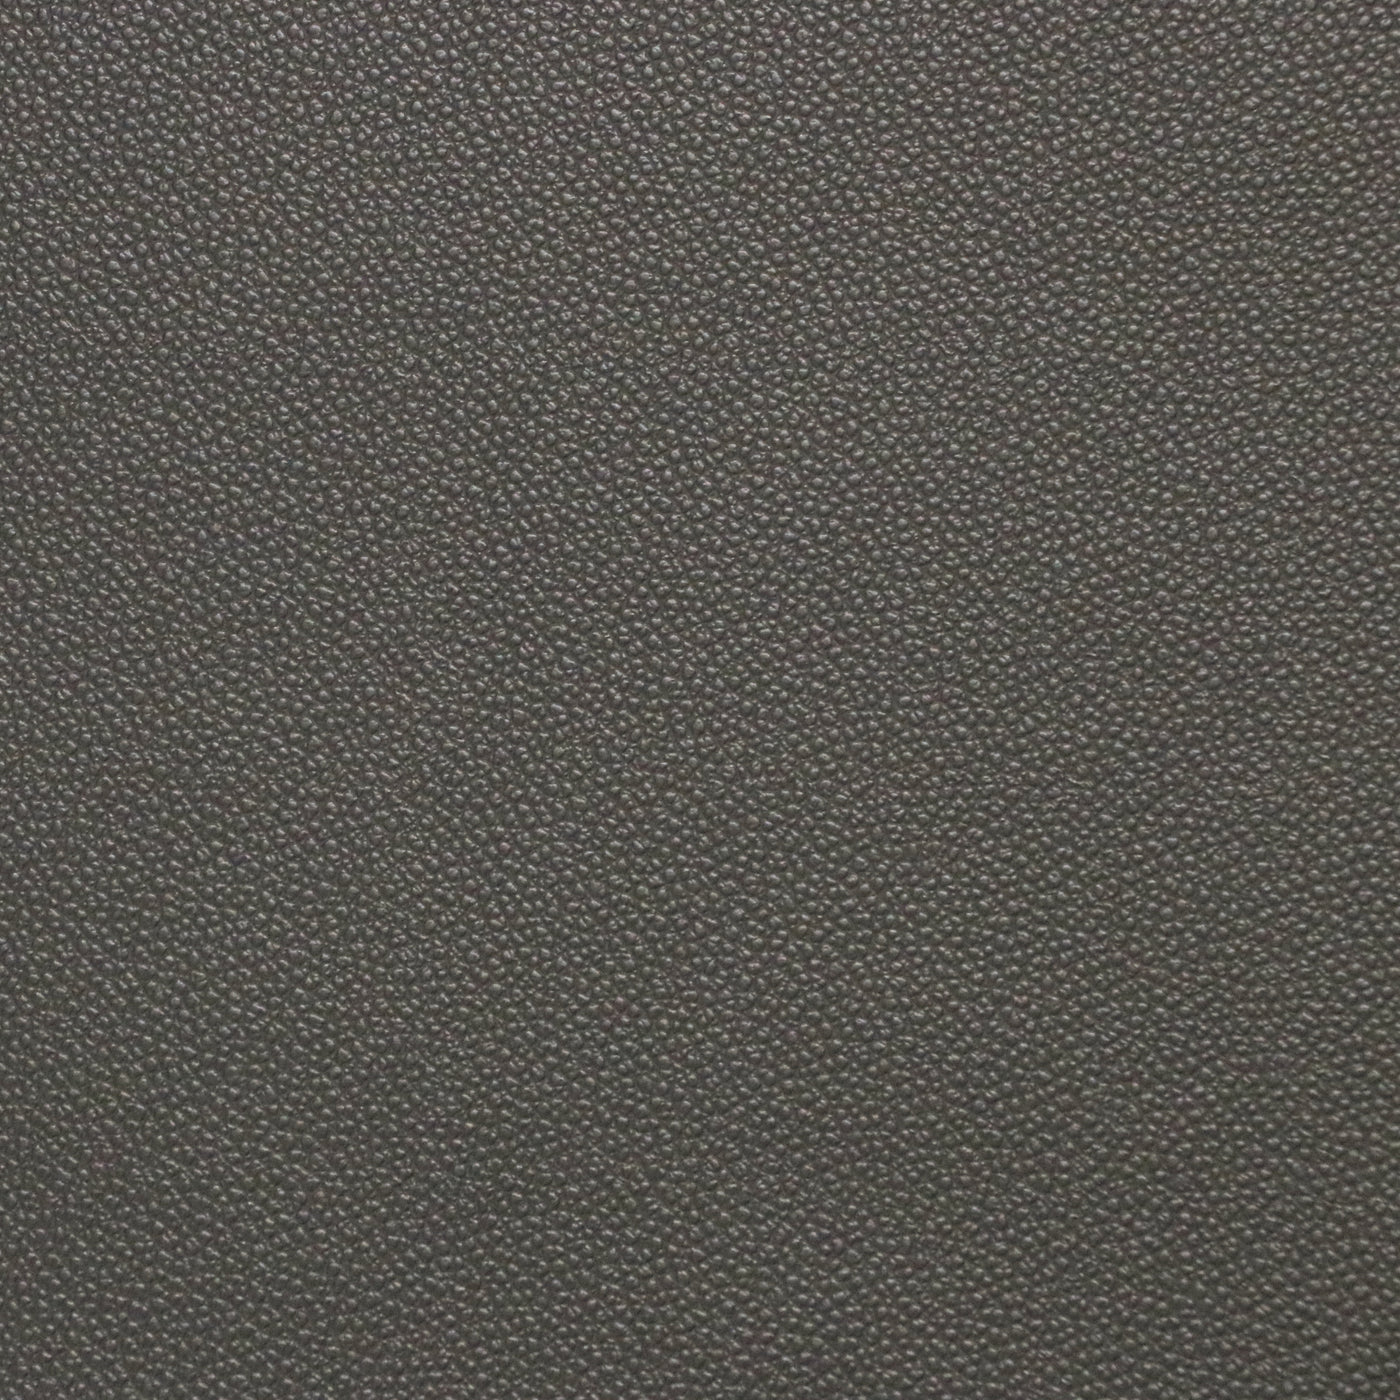 Packaged 1/2 Yard Cut: Charcoal Pebble Faux Leather